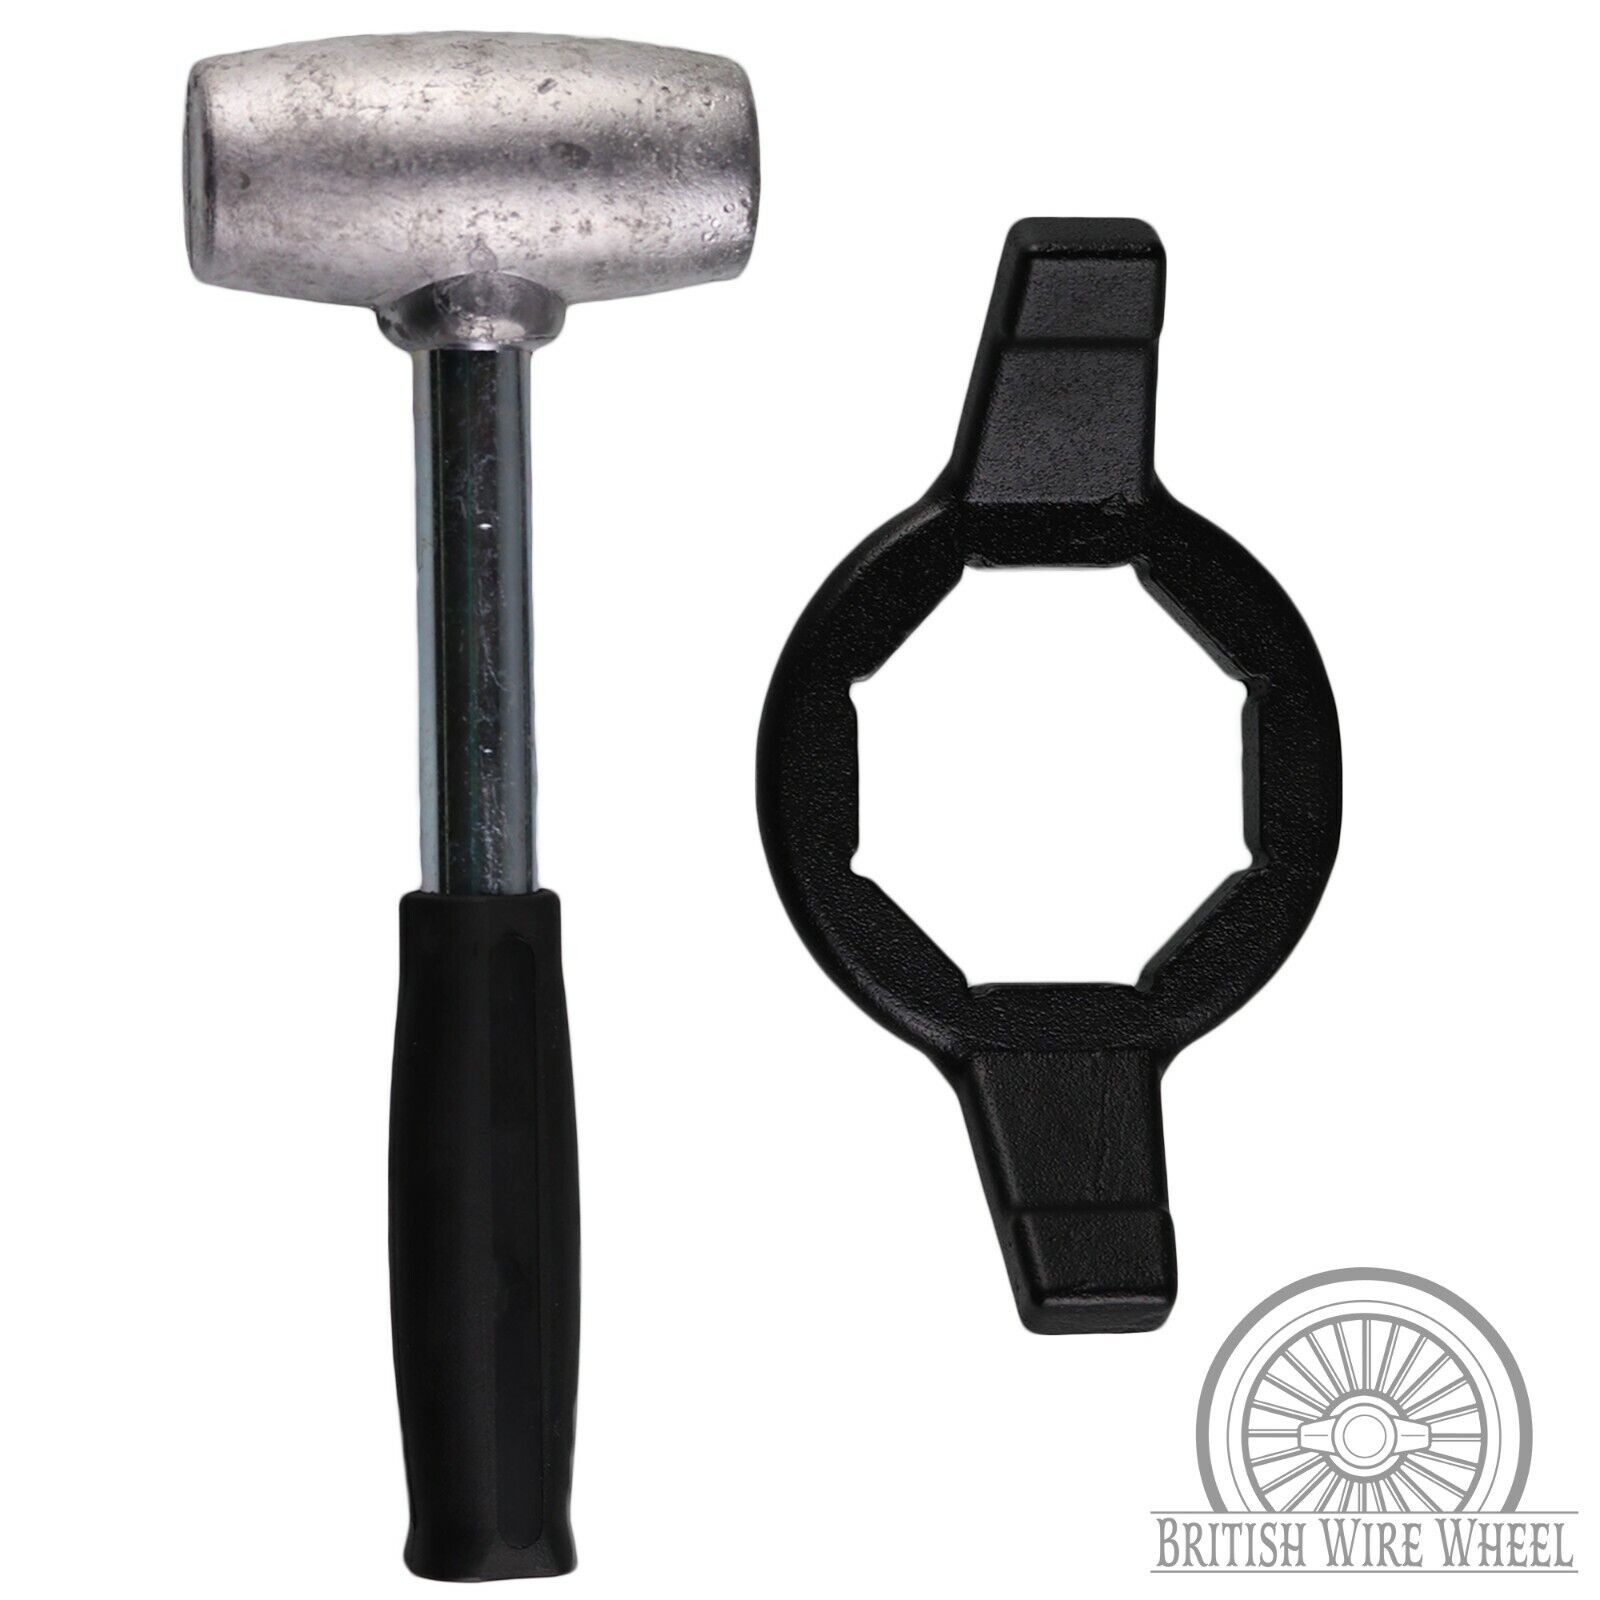 4 lb Dayton Large-scale sale Type Lead Hammer and for Hex Sided Lowrider 8 trend rank Wrench